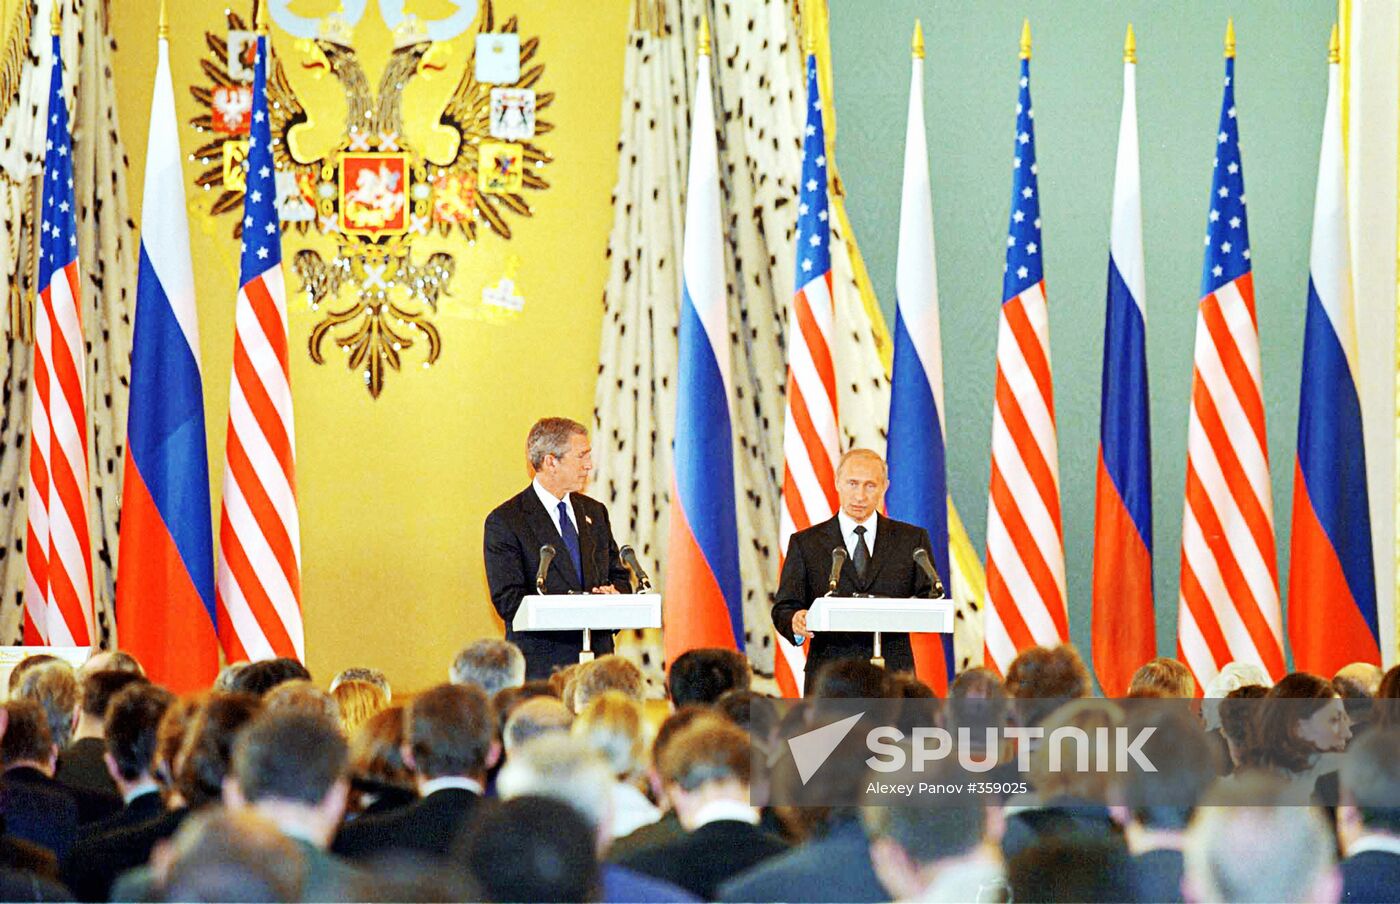 Putin and Bush at joint news conference in Moscow